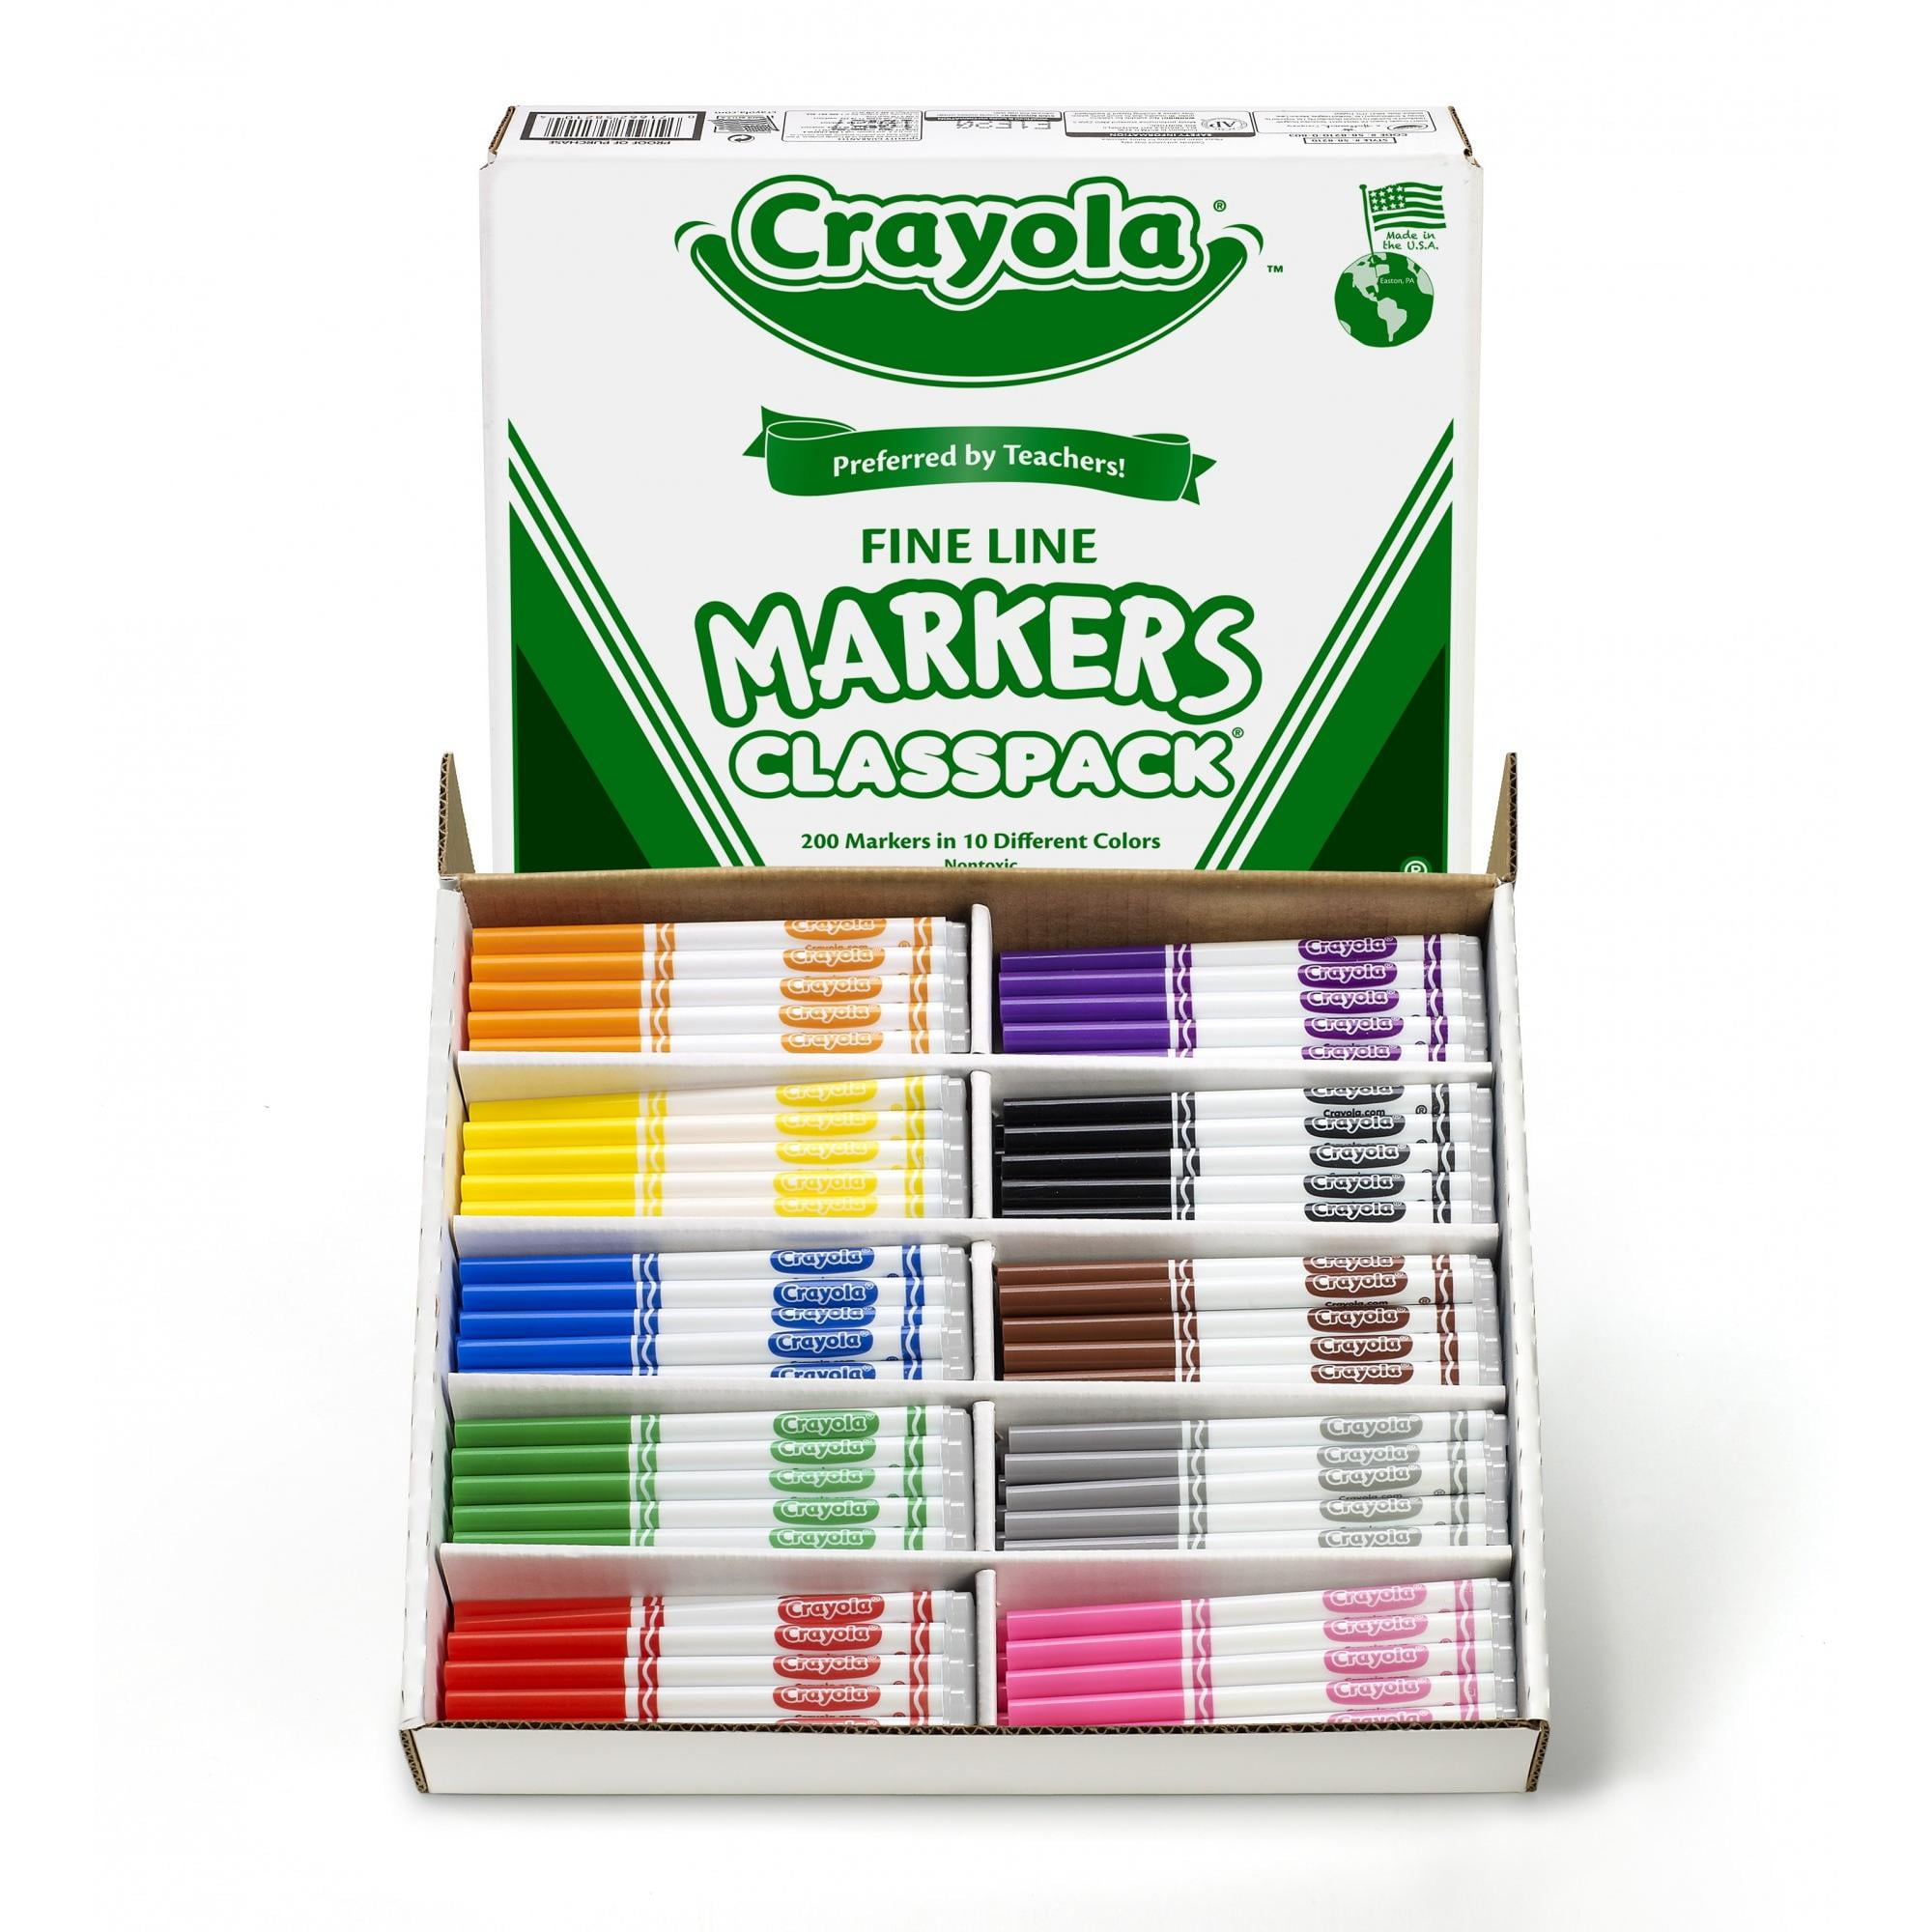  Crayola Broad Line Washable Markers - 200ct (8 Assorted  Colors), Kids Bulk Classroom Markers, Back to School Supplies for Teachers,  Ages 3+ : Toys & Games